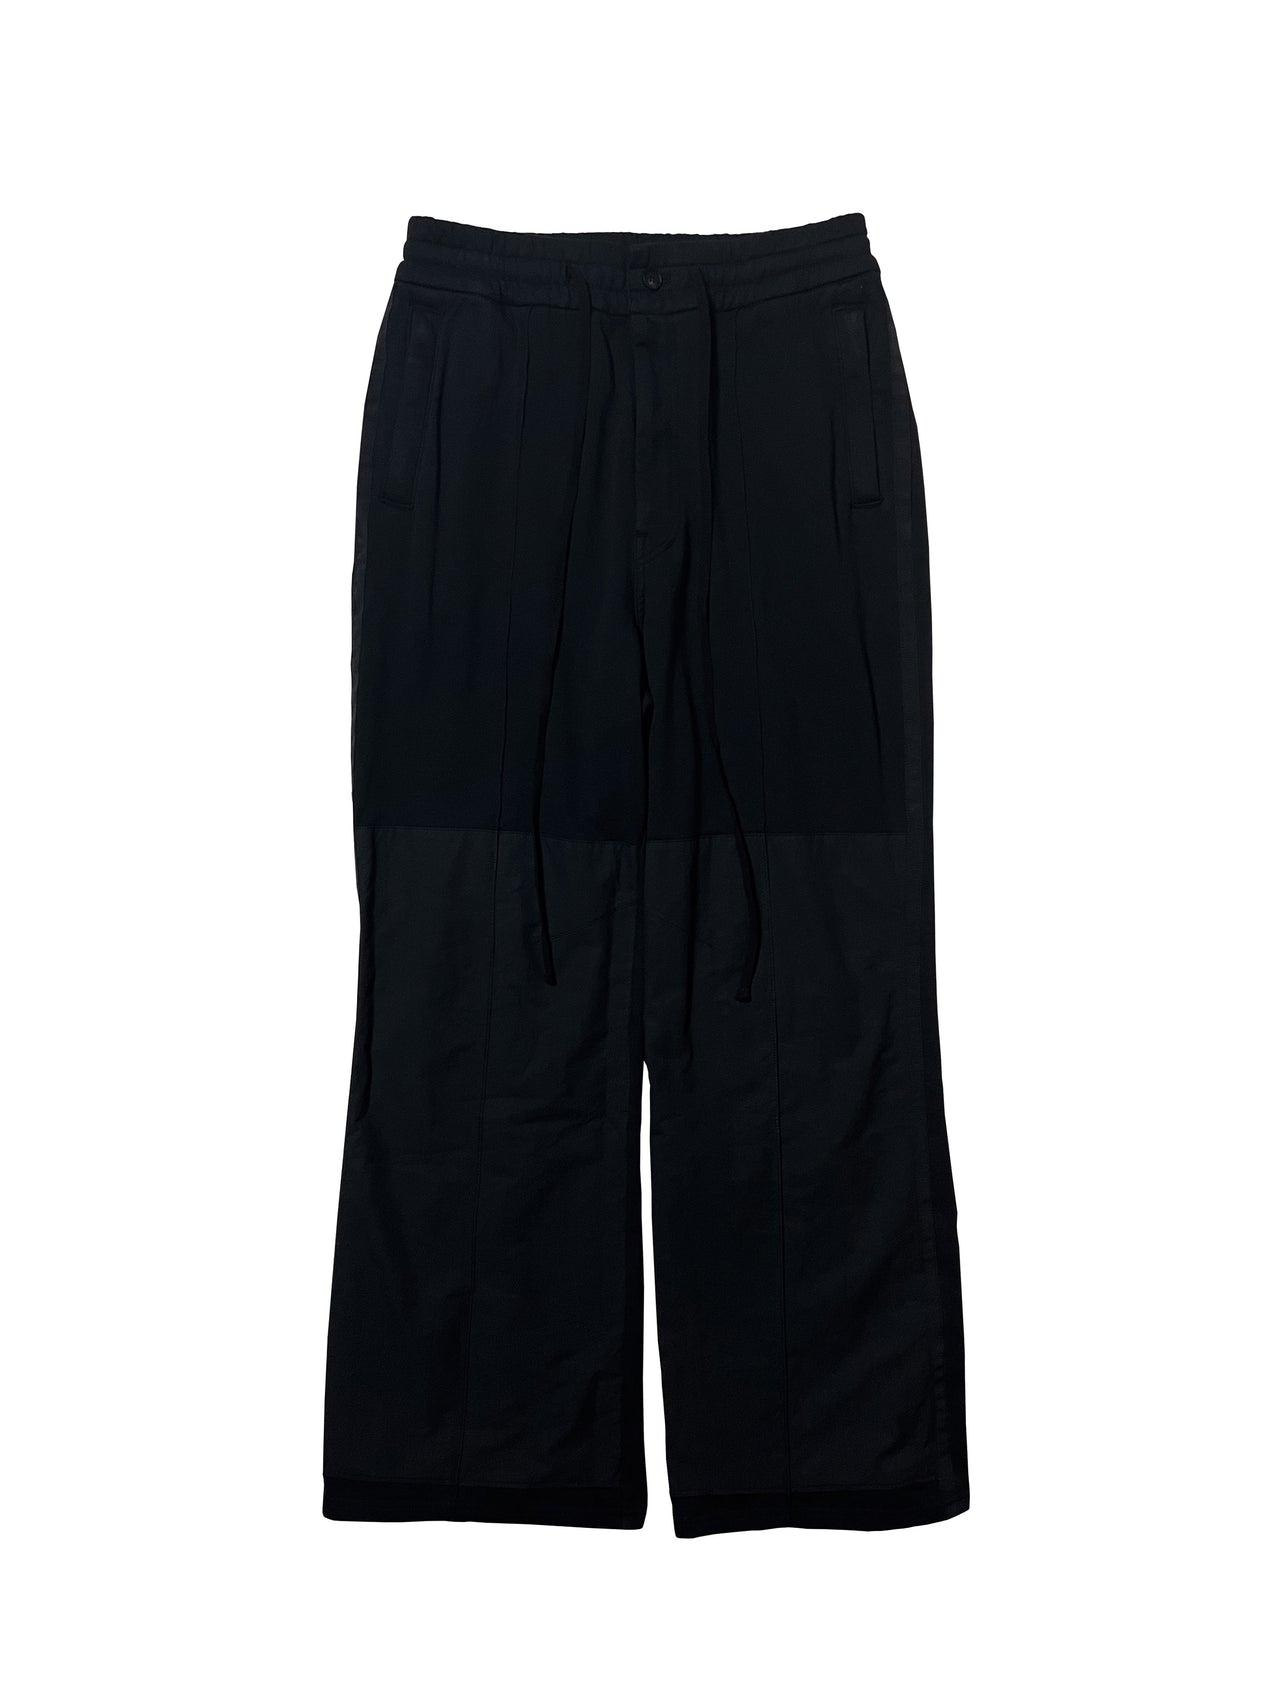 GARMENT DYED LOUNGE TROUSERS in BLACK